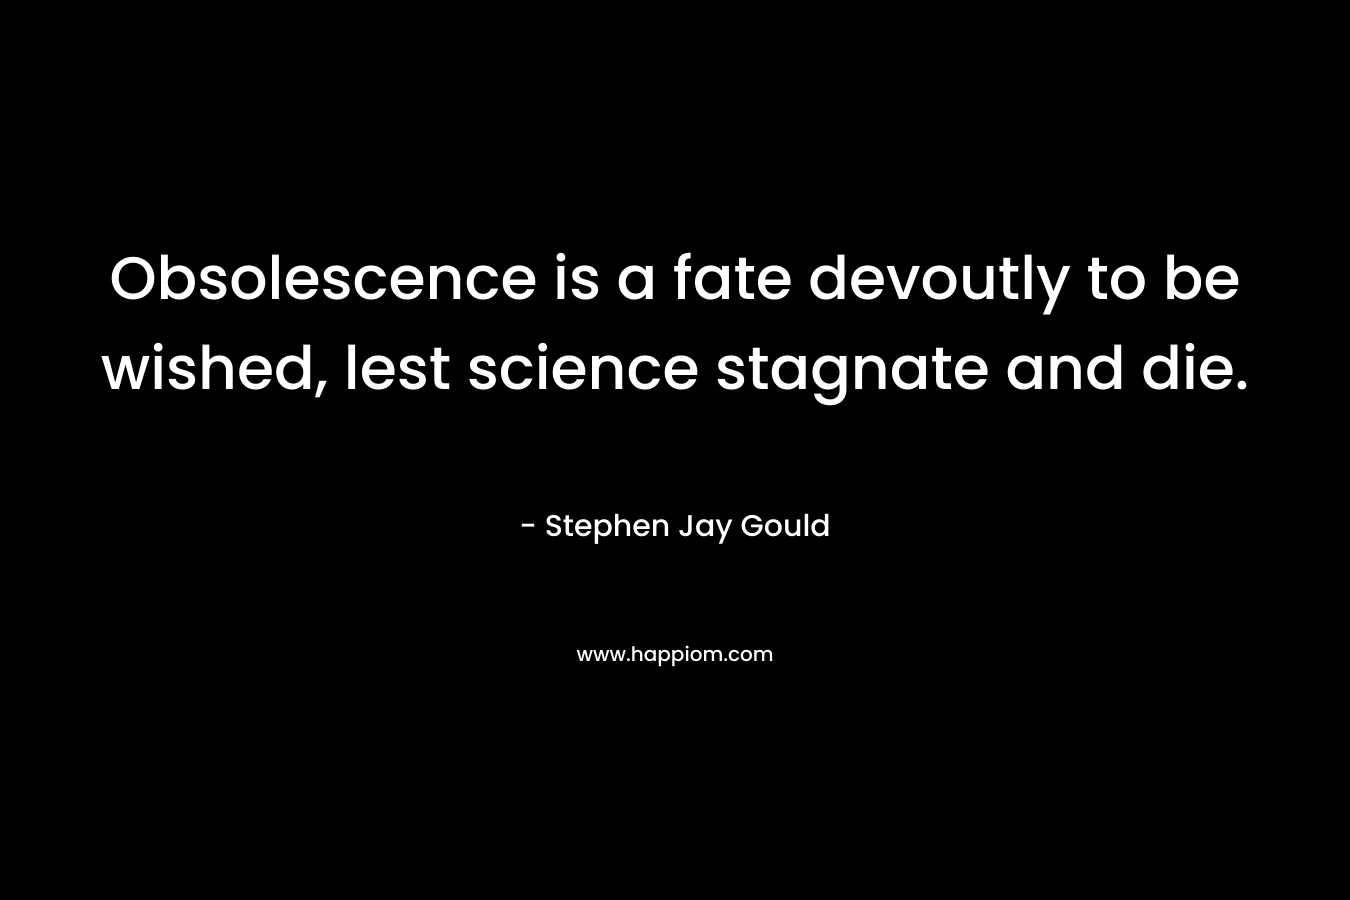 Obsolescence is a fate devoutly to be wished, lest science stagnate and die.